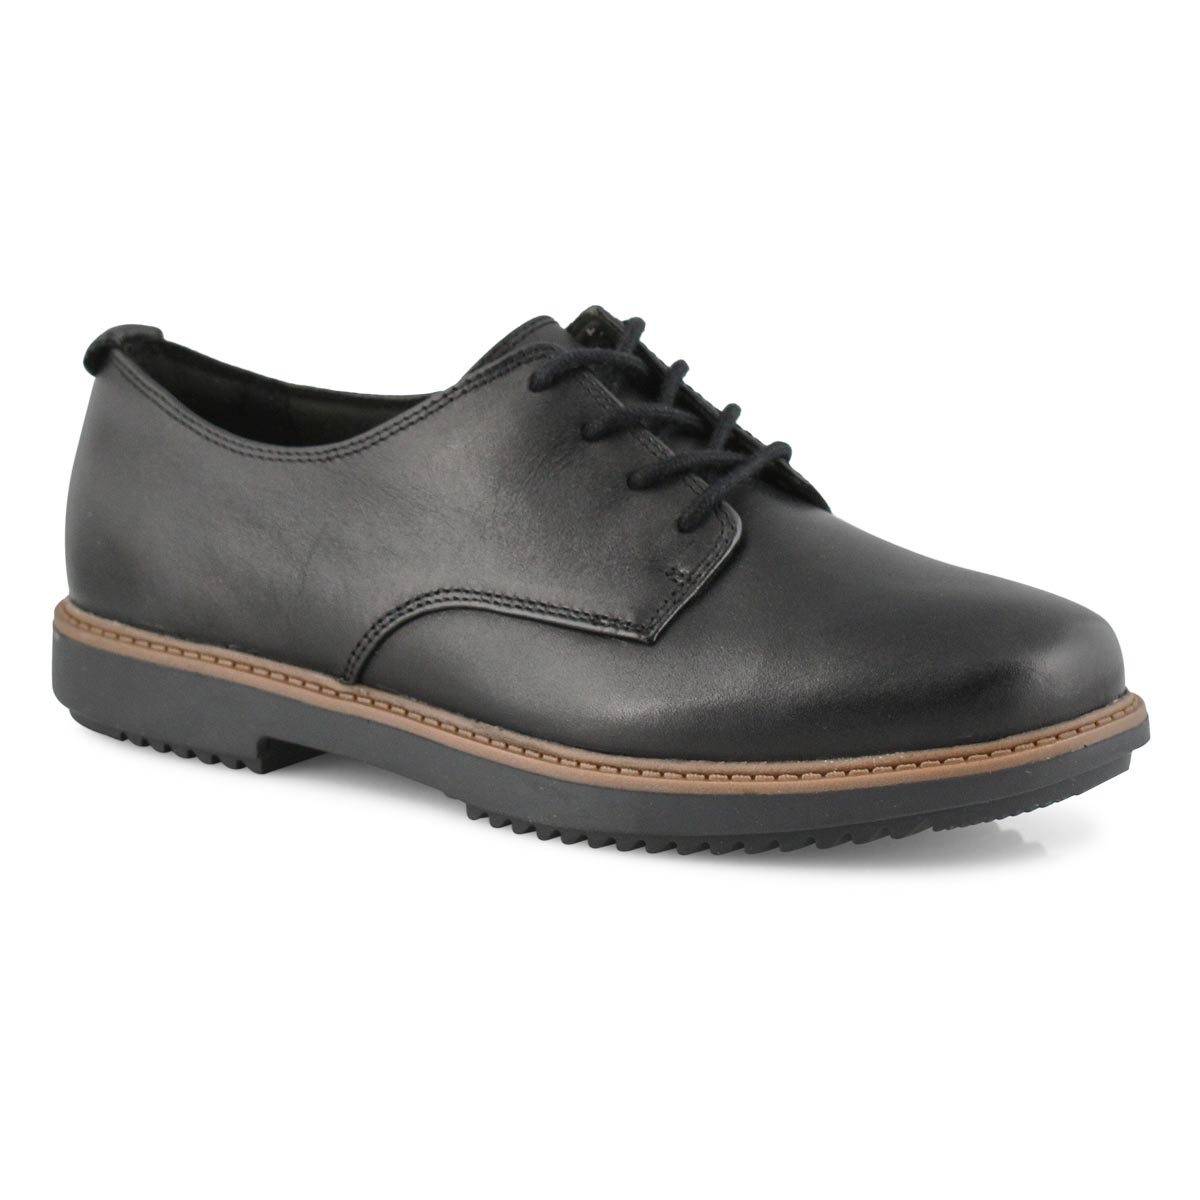 clarks oxford shoes womens off 61 